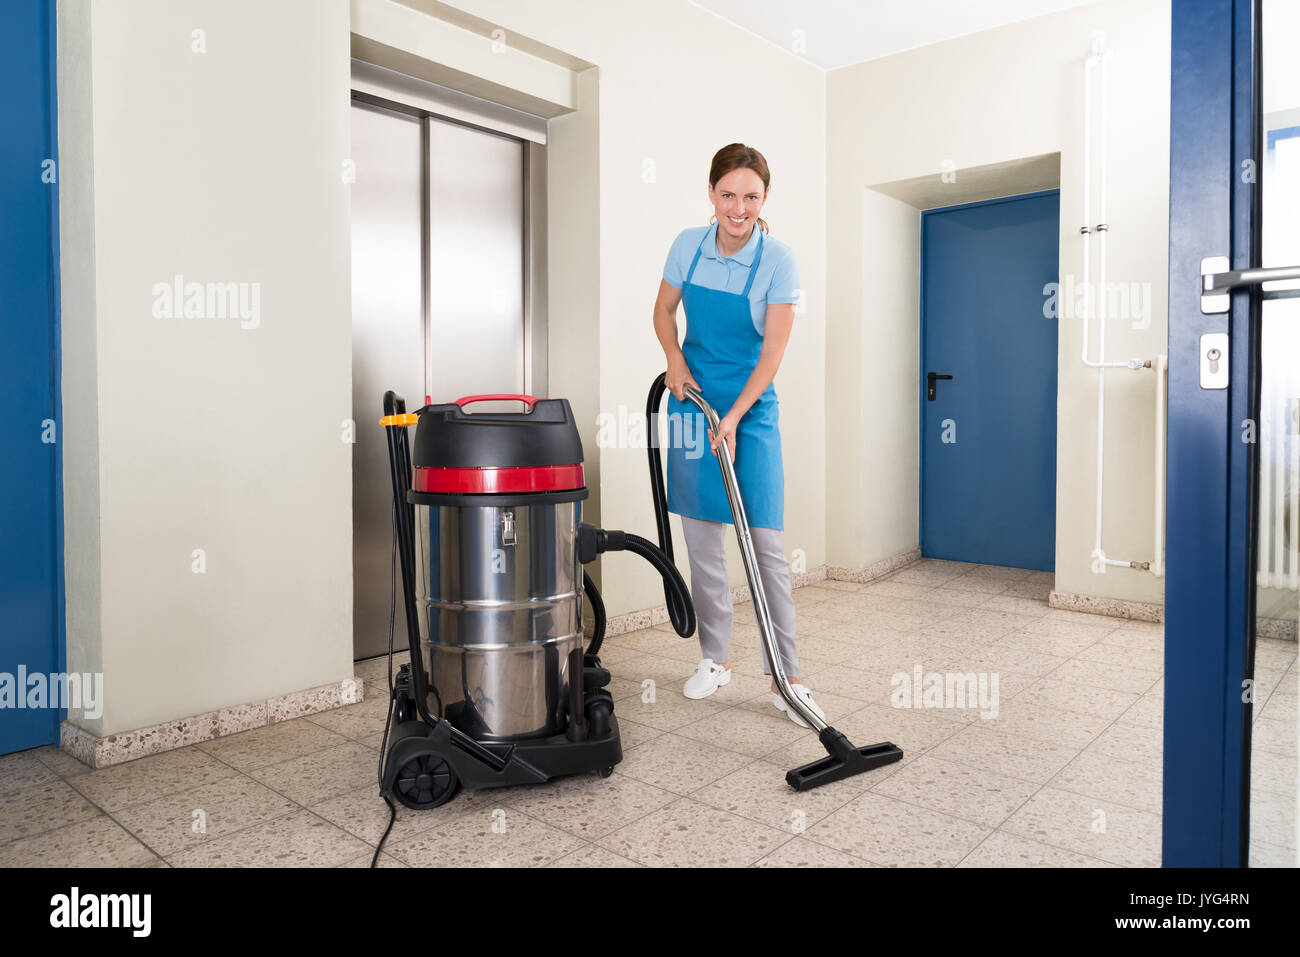 Young Female Janitor Cleaning Floor With Vacuum Cleaner Stock Photo